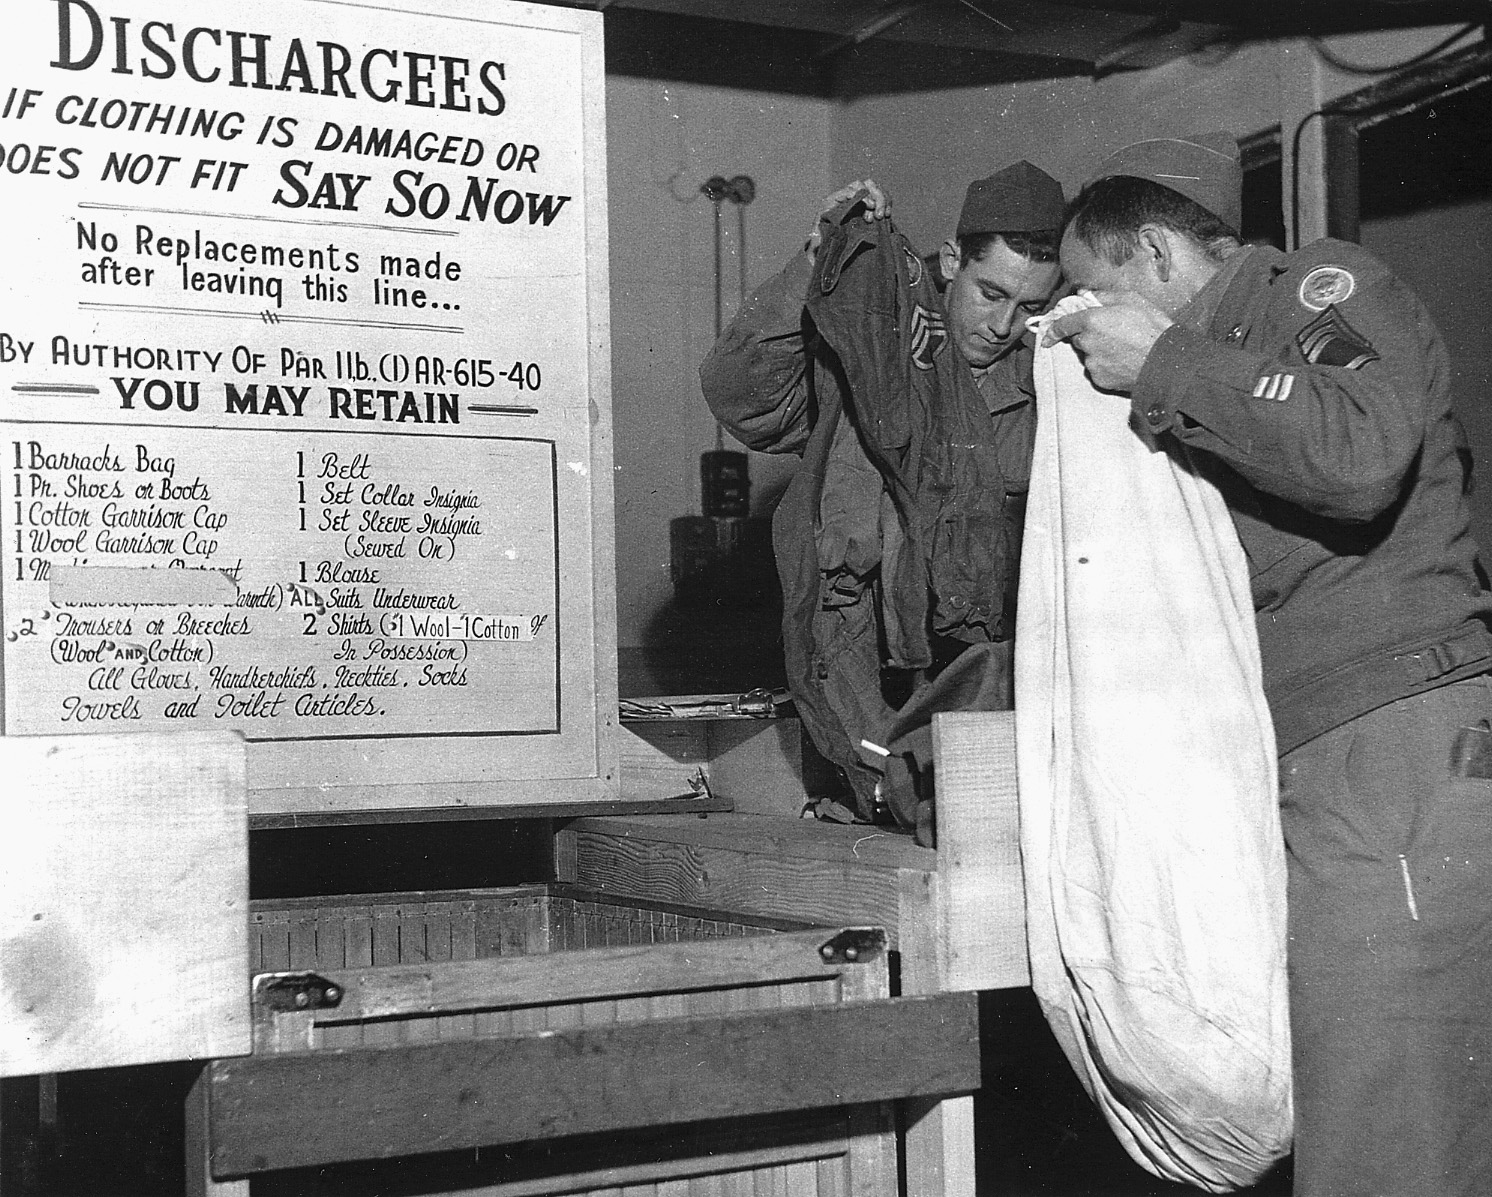 Turning in excess clothing is the next step. The place card tells him what he can keep. (Marines were allowed to keep their blankets.) A new uniform is issued to replace worn garments.